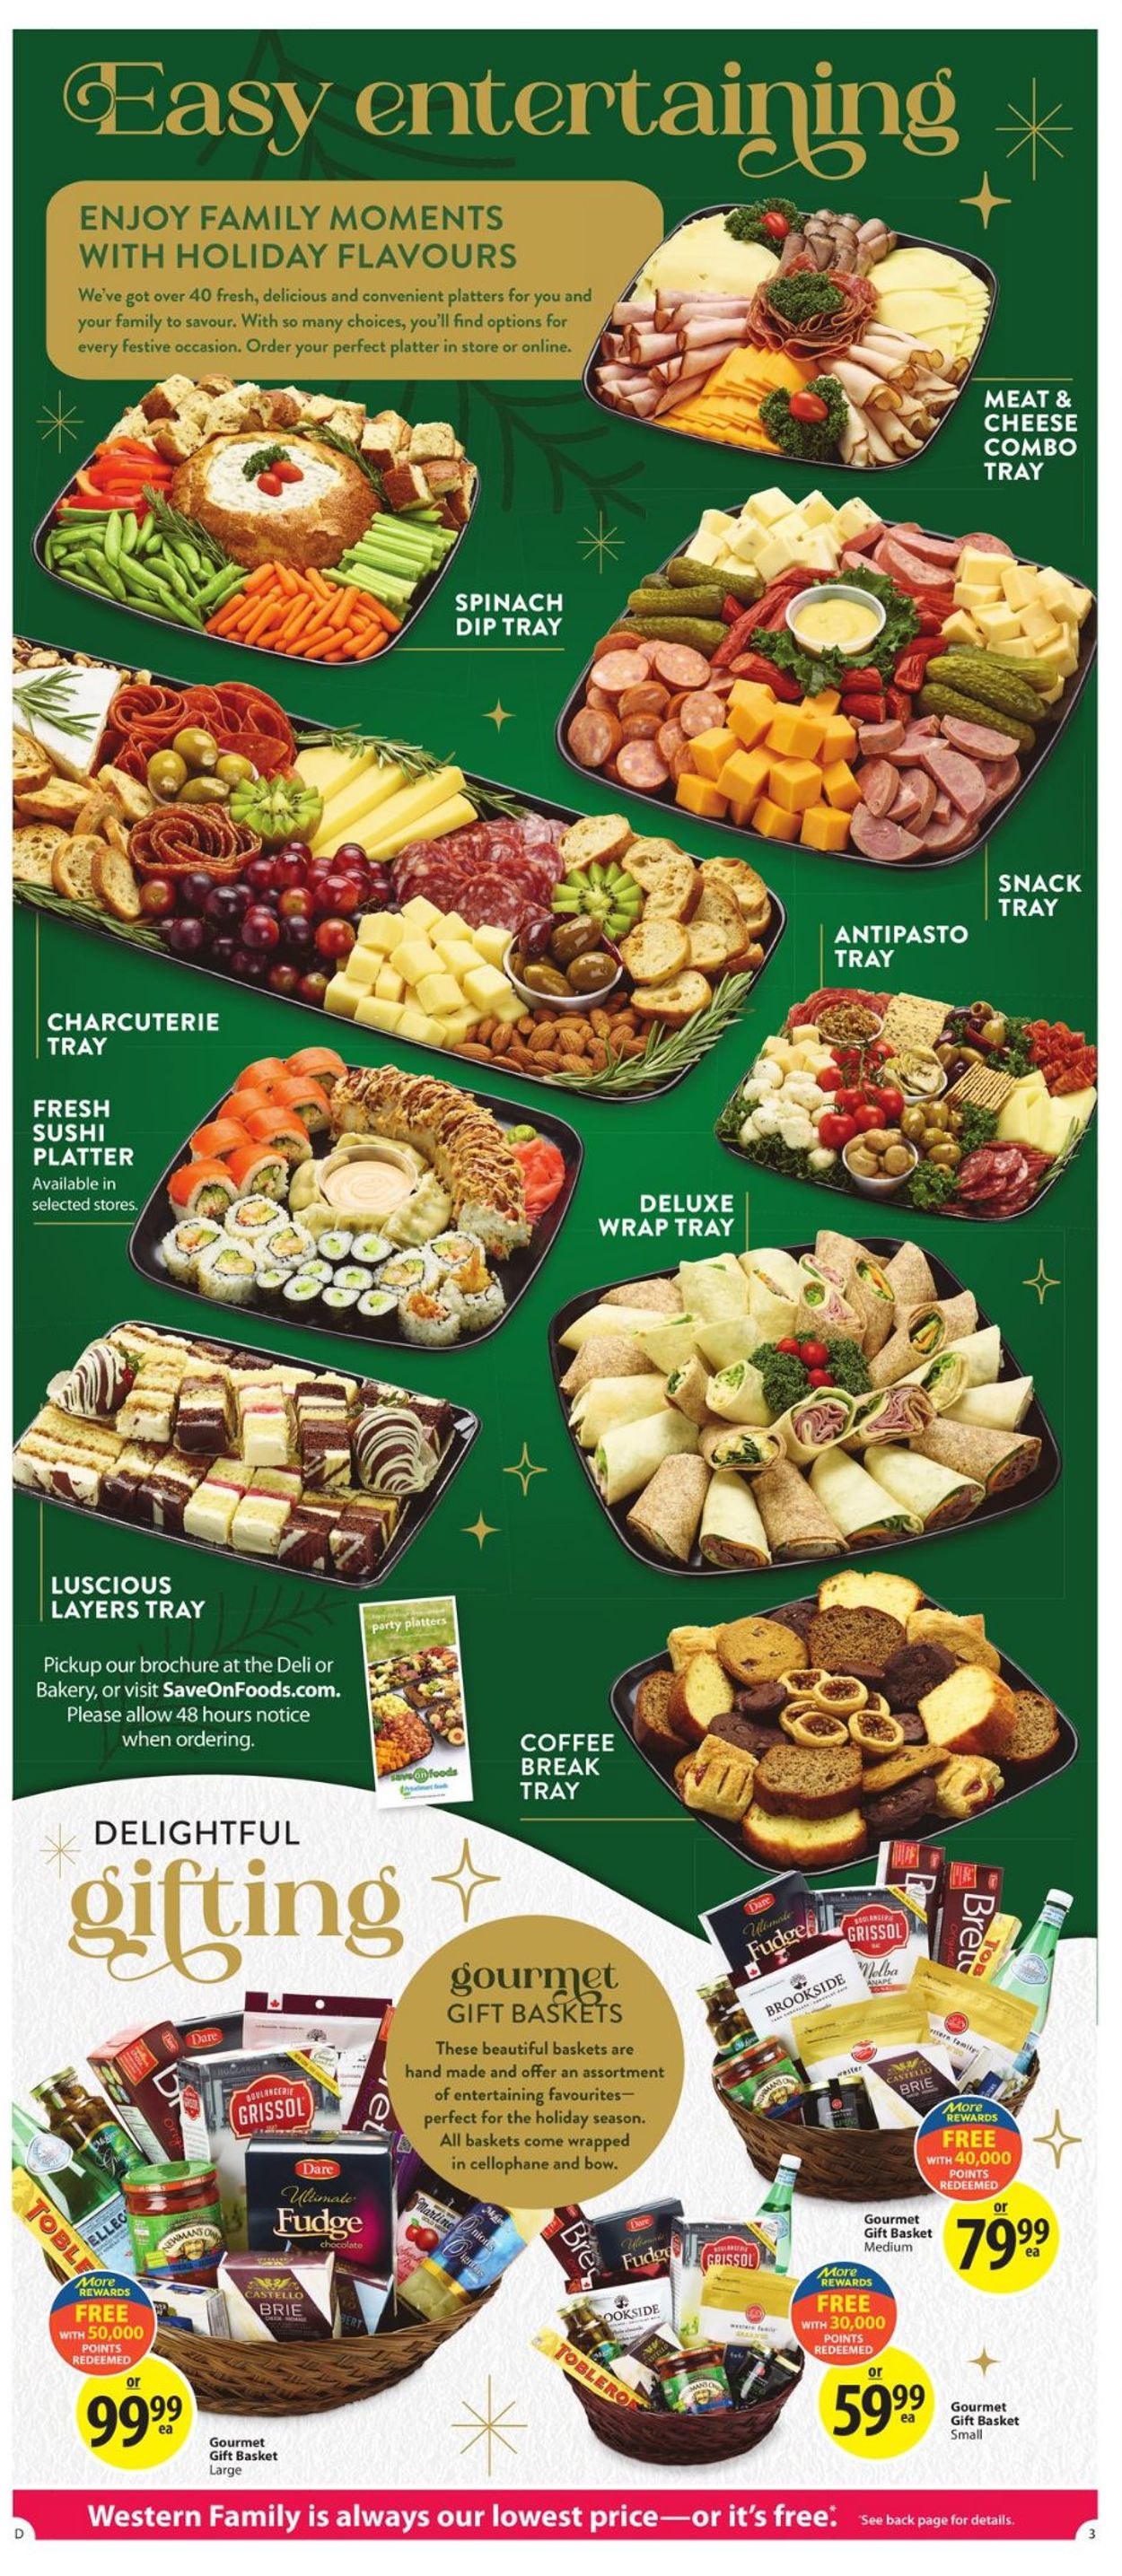 Save-On-Foods Flyer from 12/02/2021